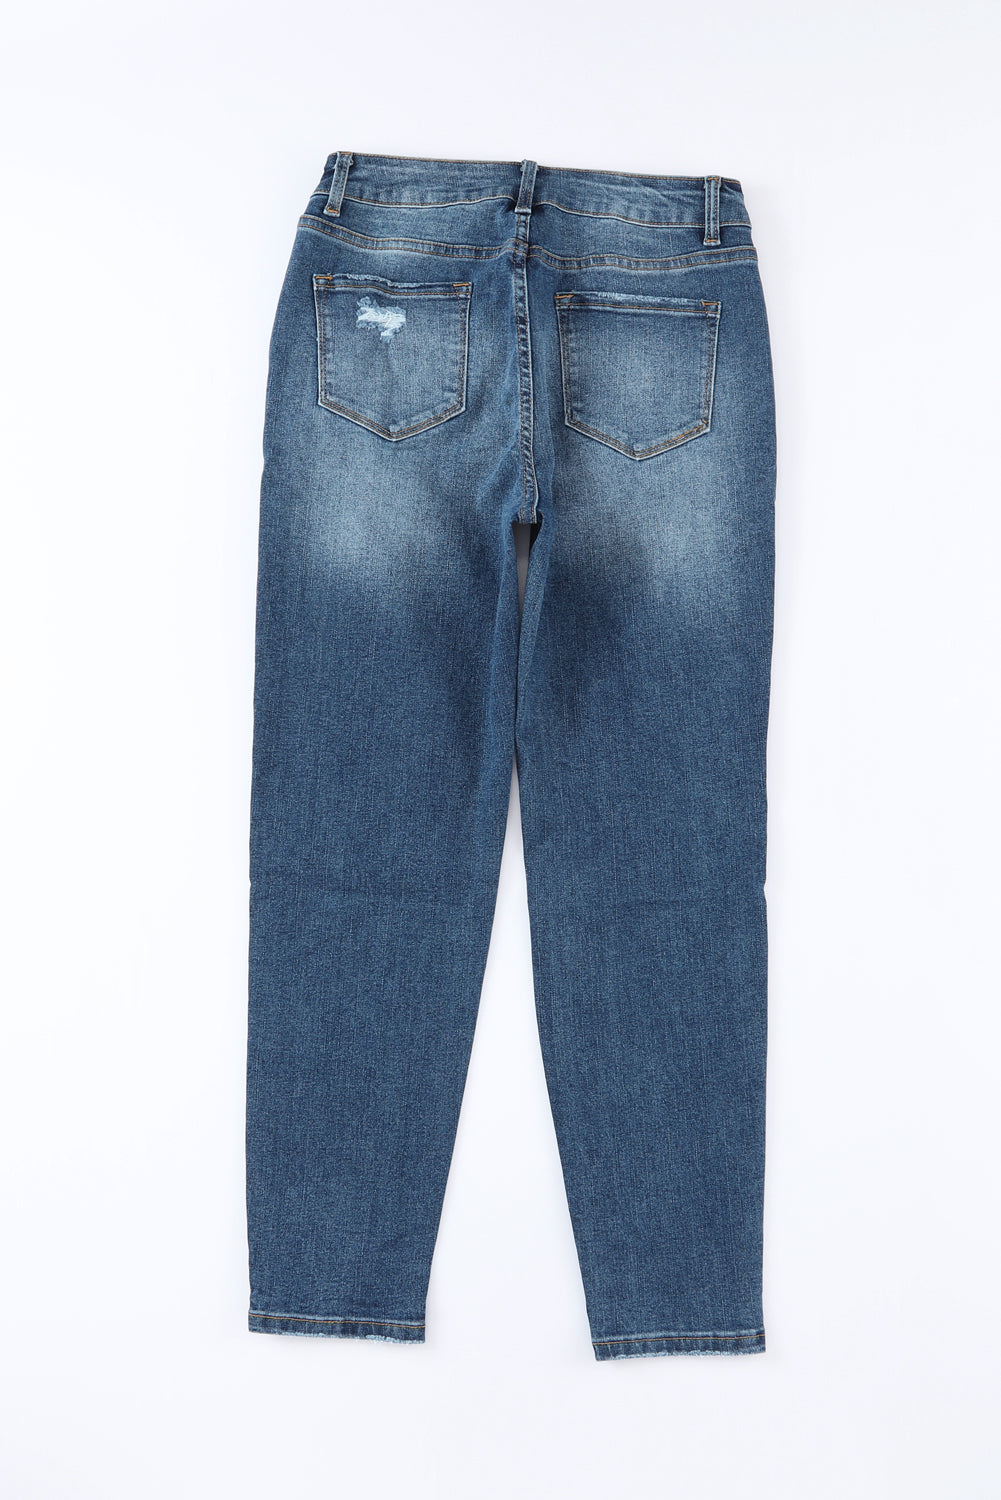 Blue Distressed Button Fly High Waist Skinny Jeans